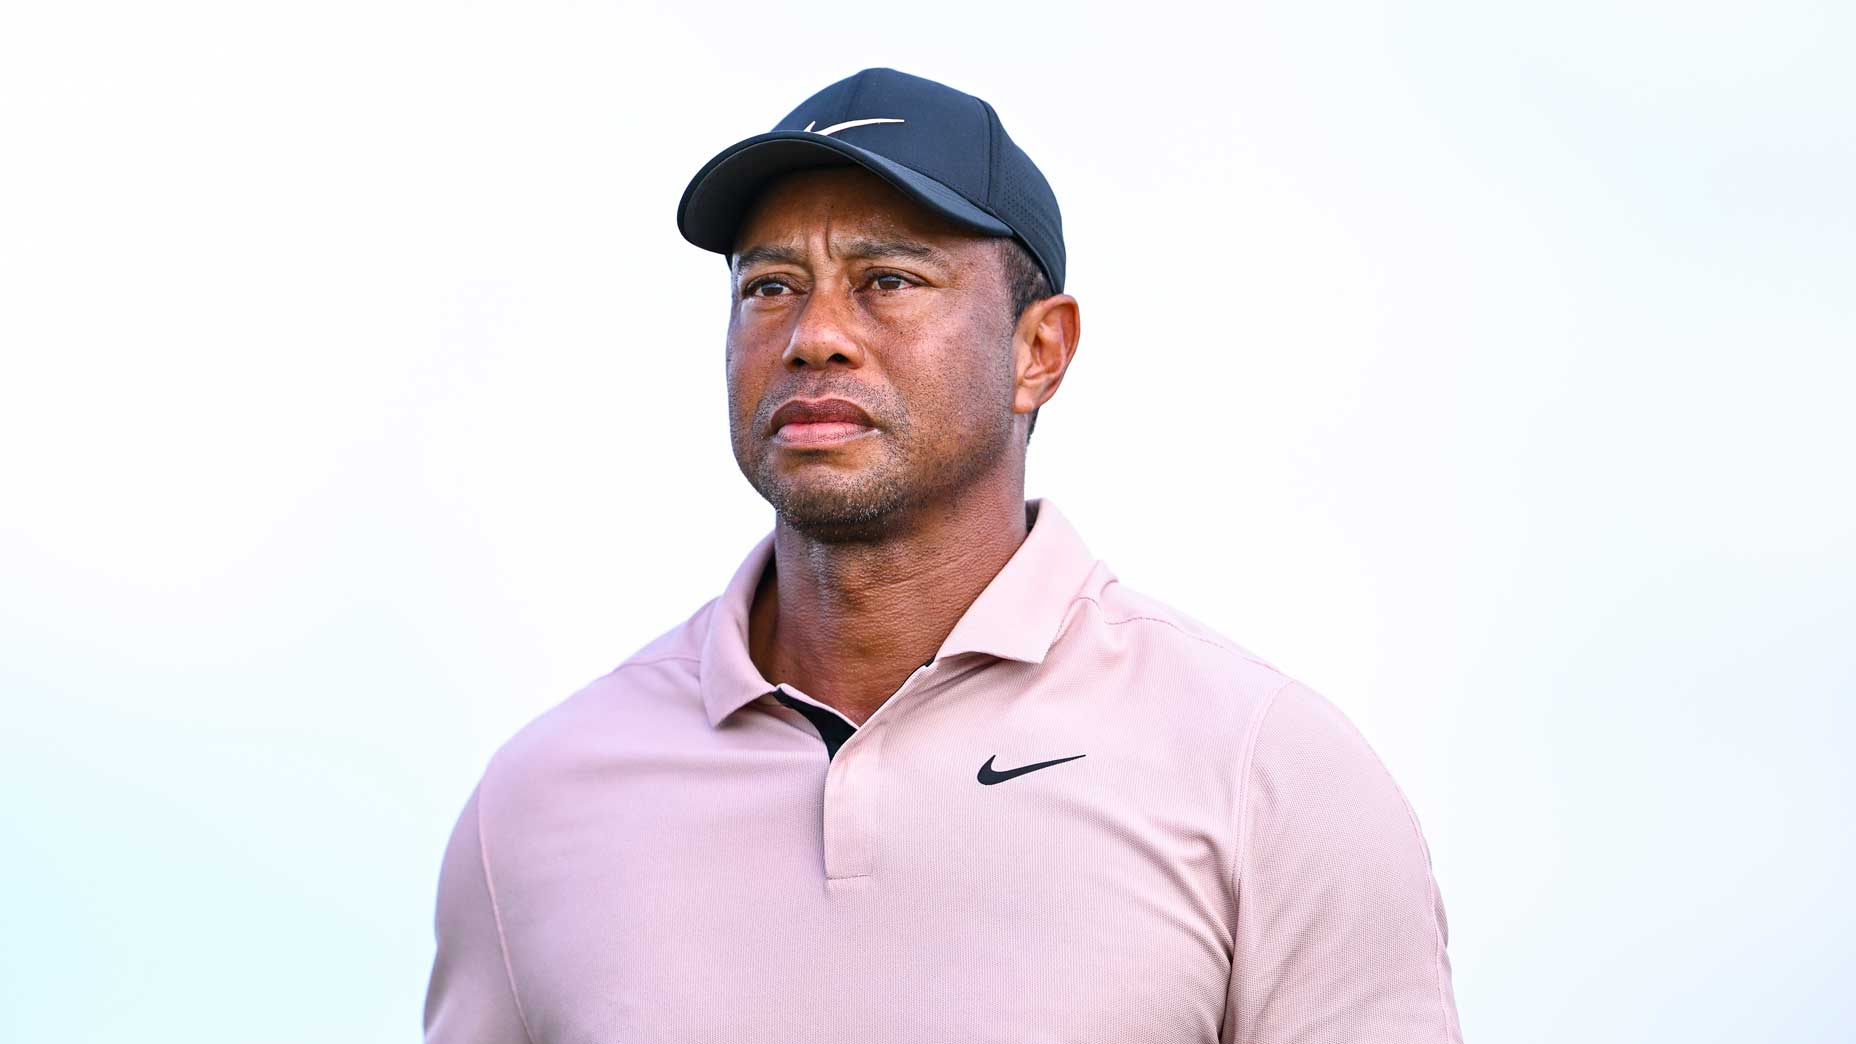 Tiger Woods shot 3-over 75 on Thursday at the Hero World Challenge.